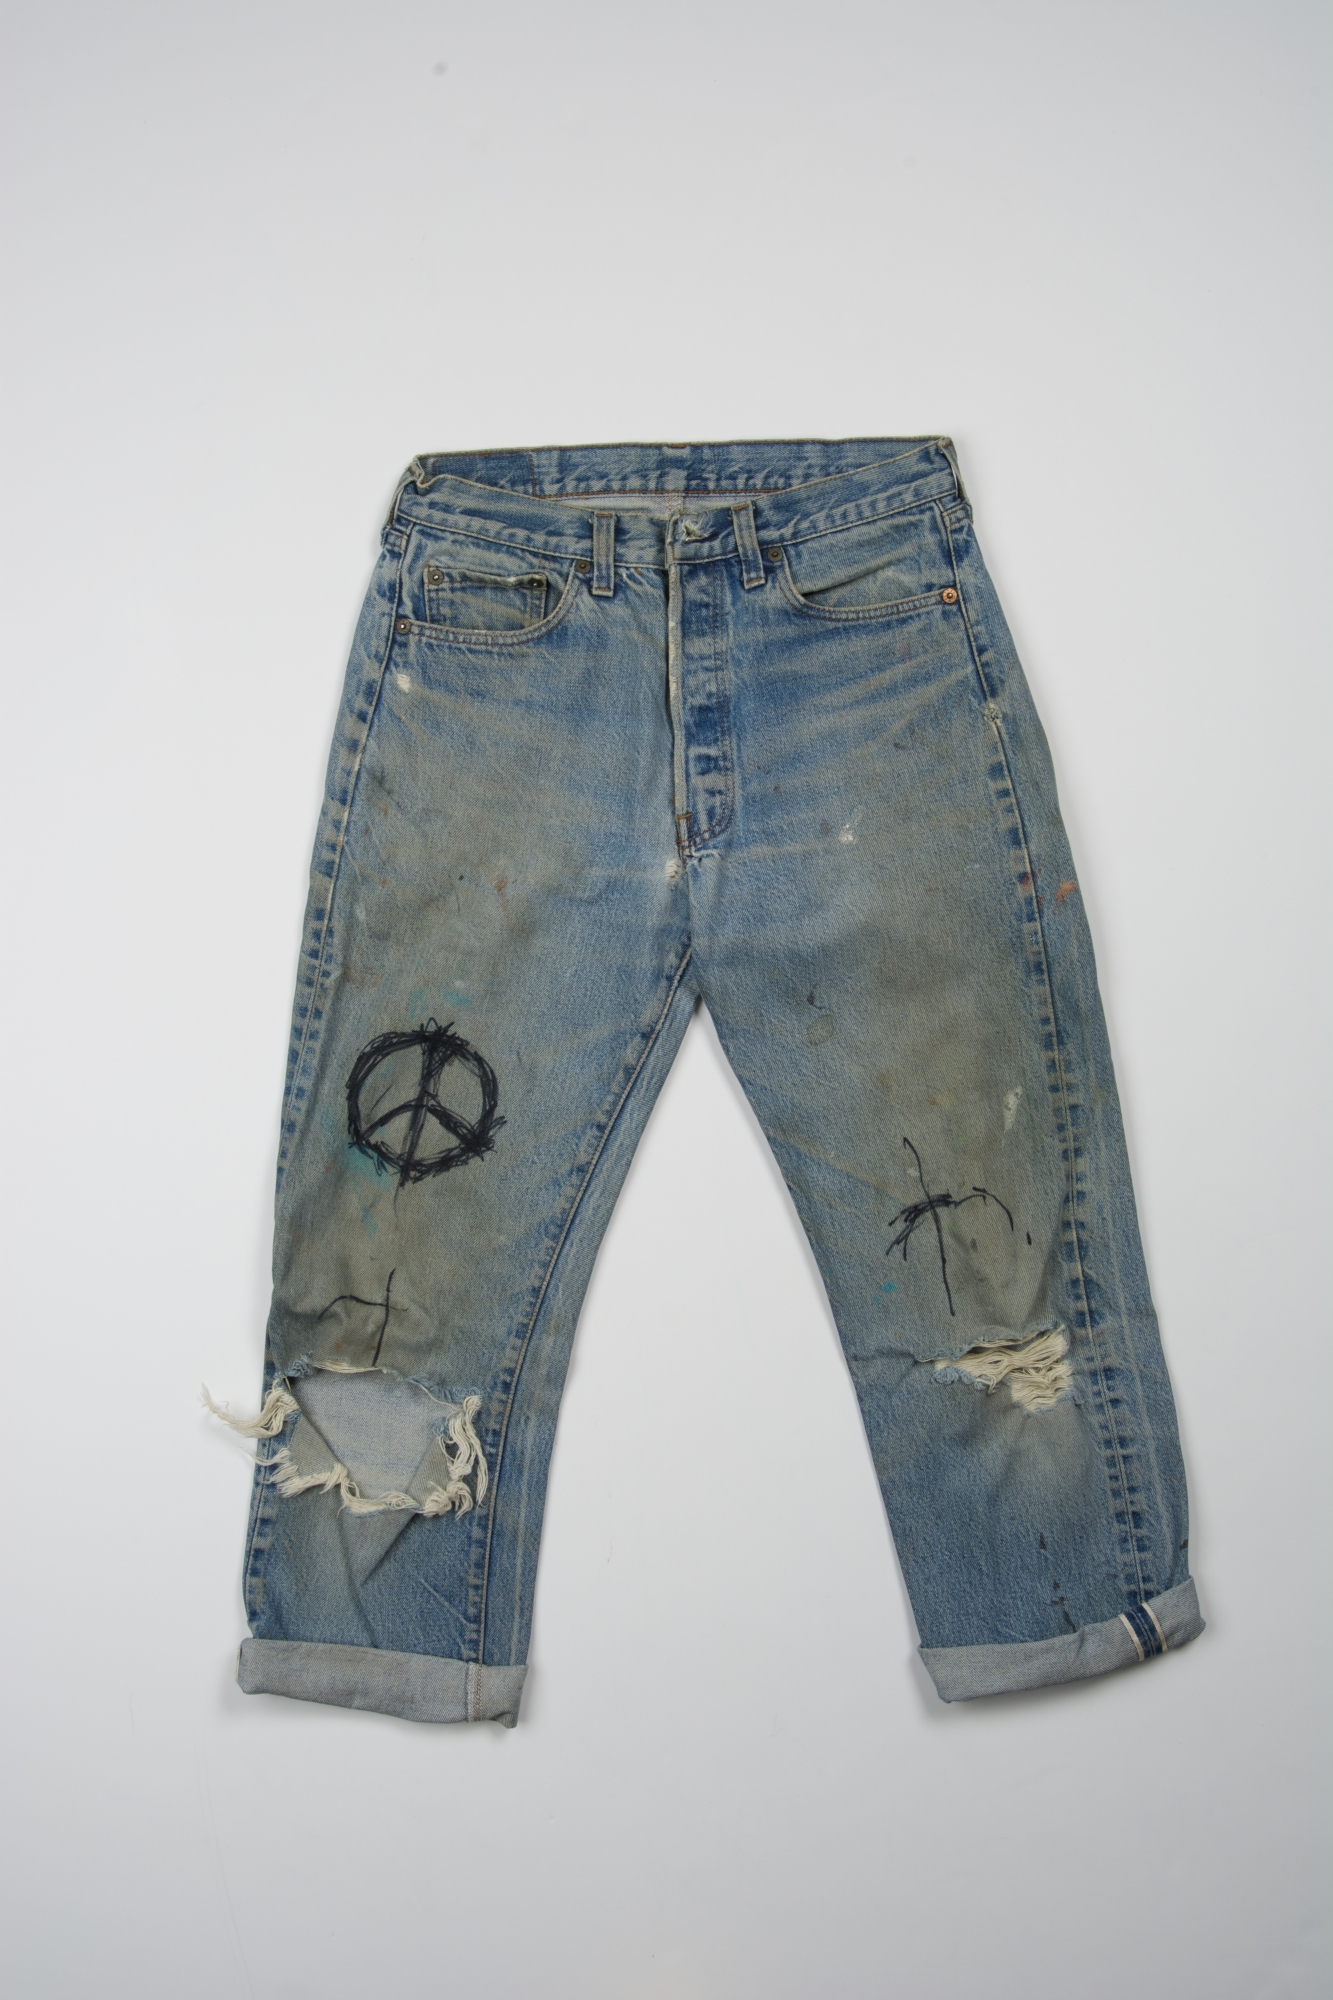 501 Jeans owned by Patti Smith donated to archives June 2013